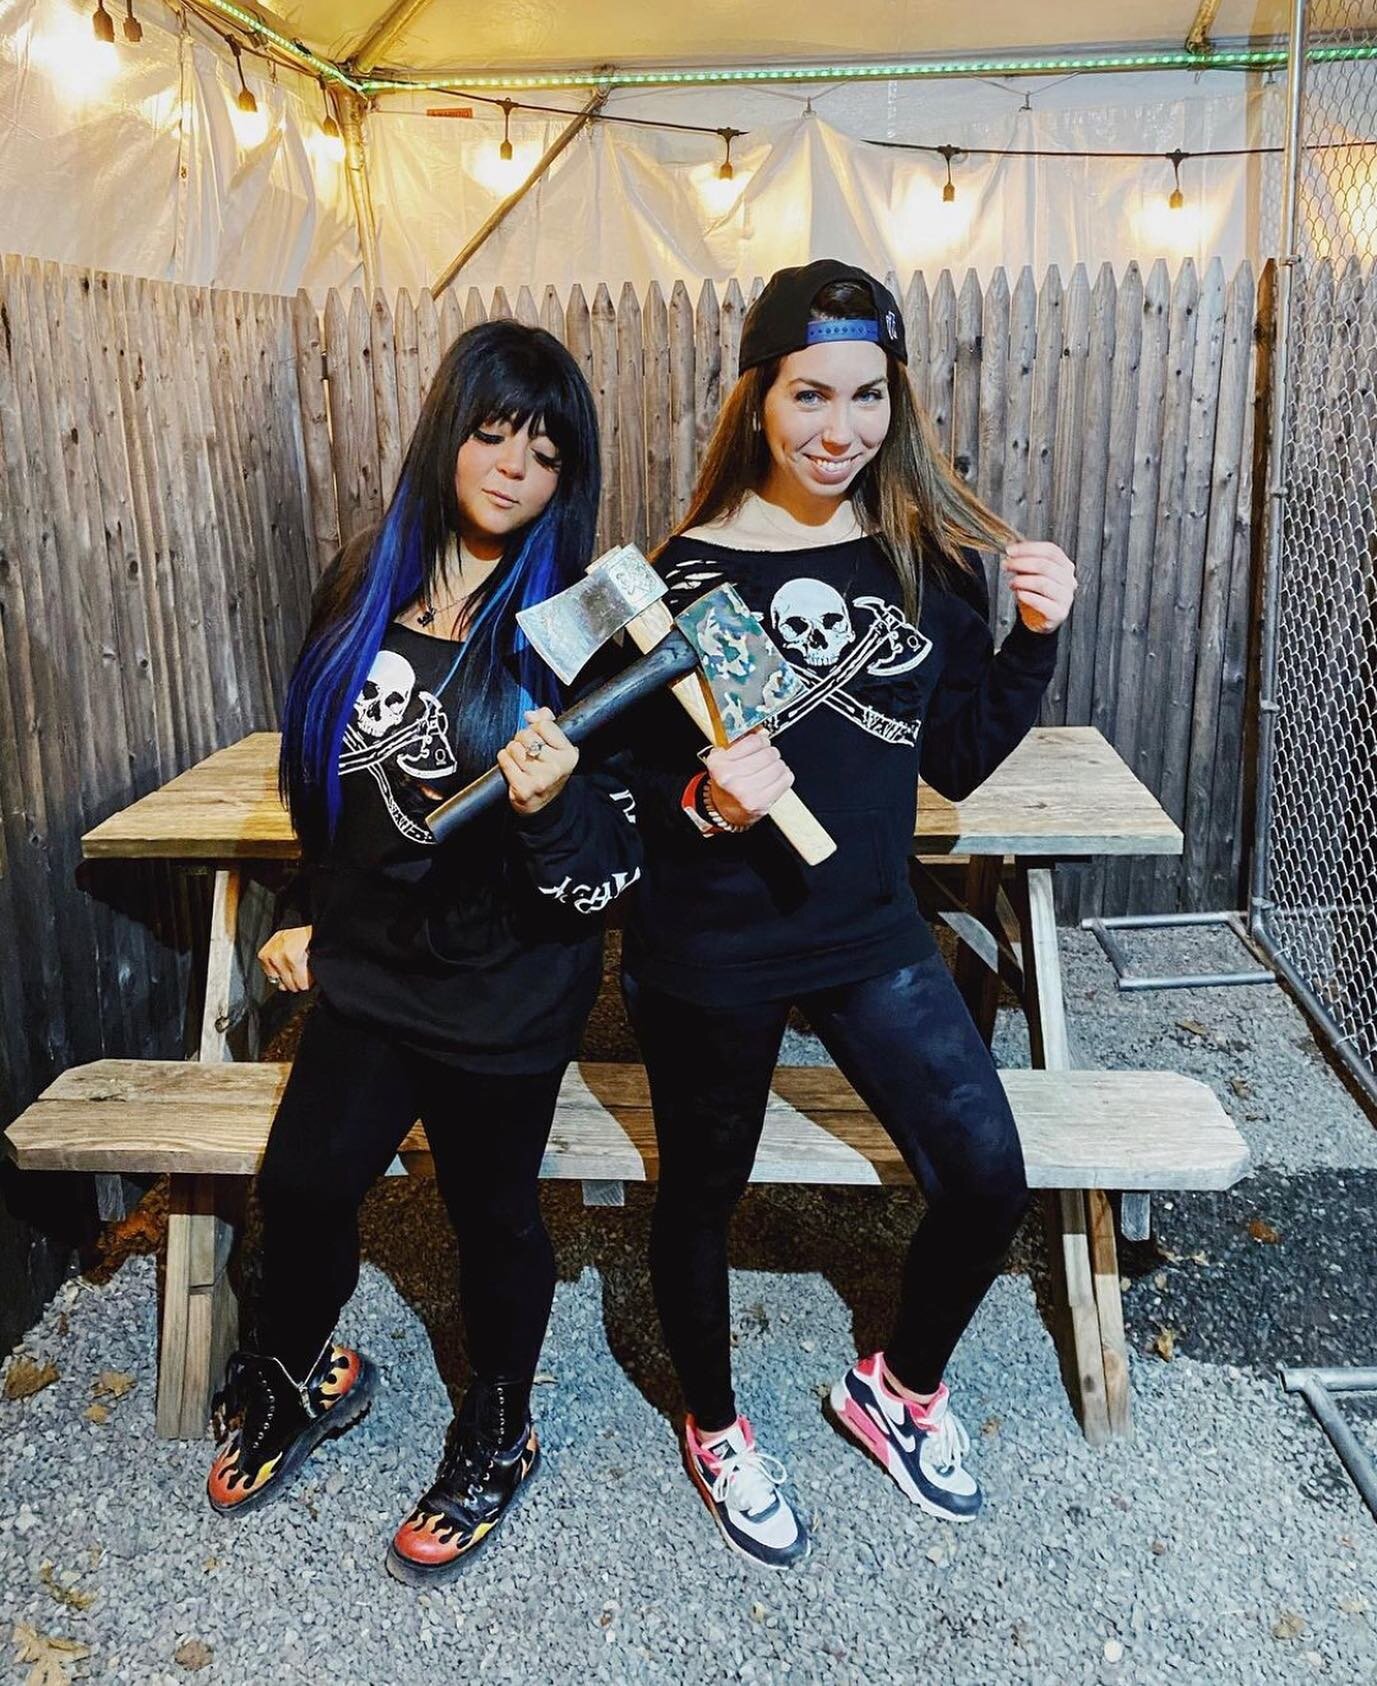 We love our league nights, we love our league throwers AND we really love these #badaxebitches @leximartone and @caitlinmarie721! 🔥🔥
.
.
.
#leaguenightallstars #alphaaxes #alphaaxethrowing #axesofinstagram #unpolished #axesandbeers #longirelandbeer